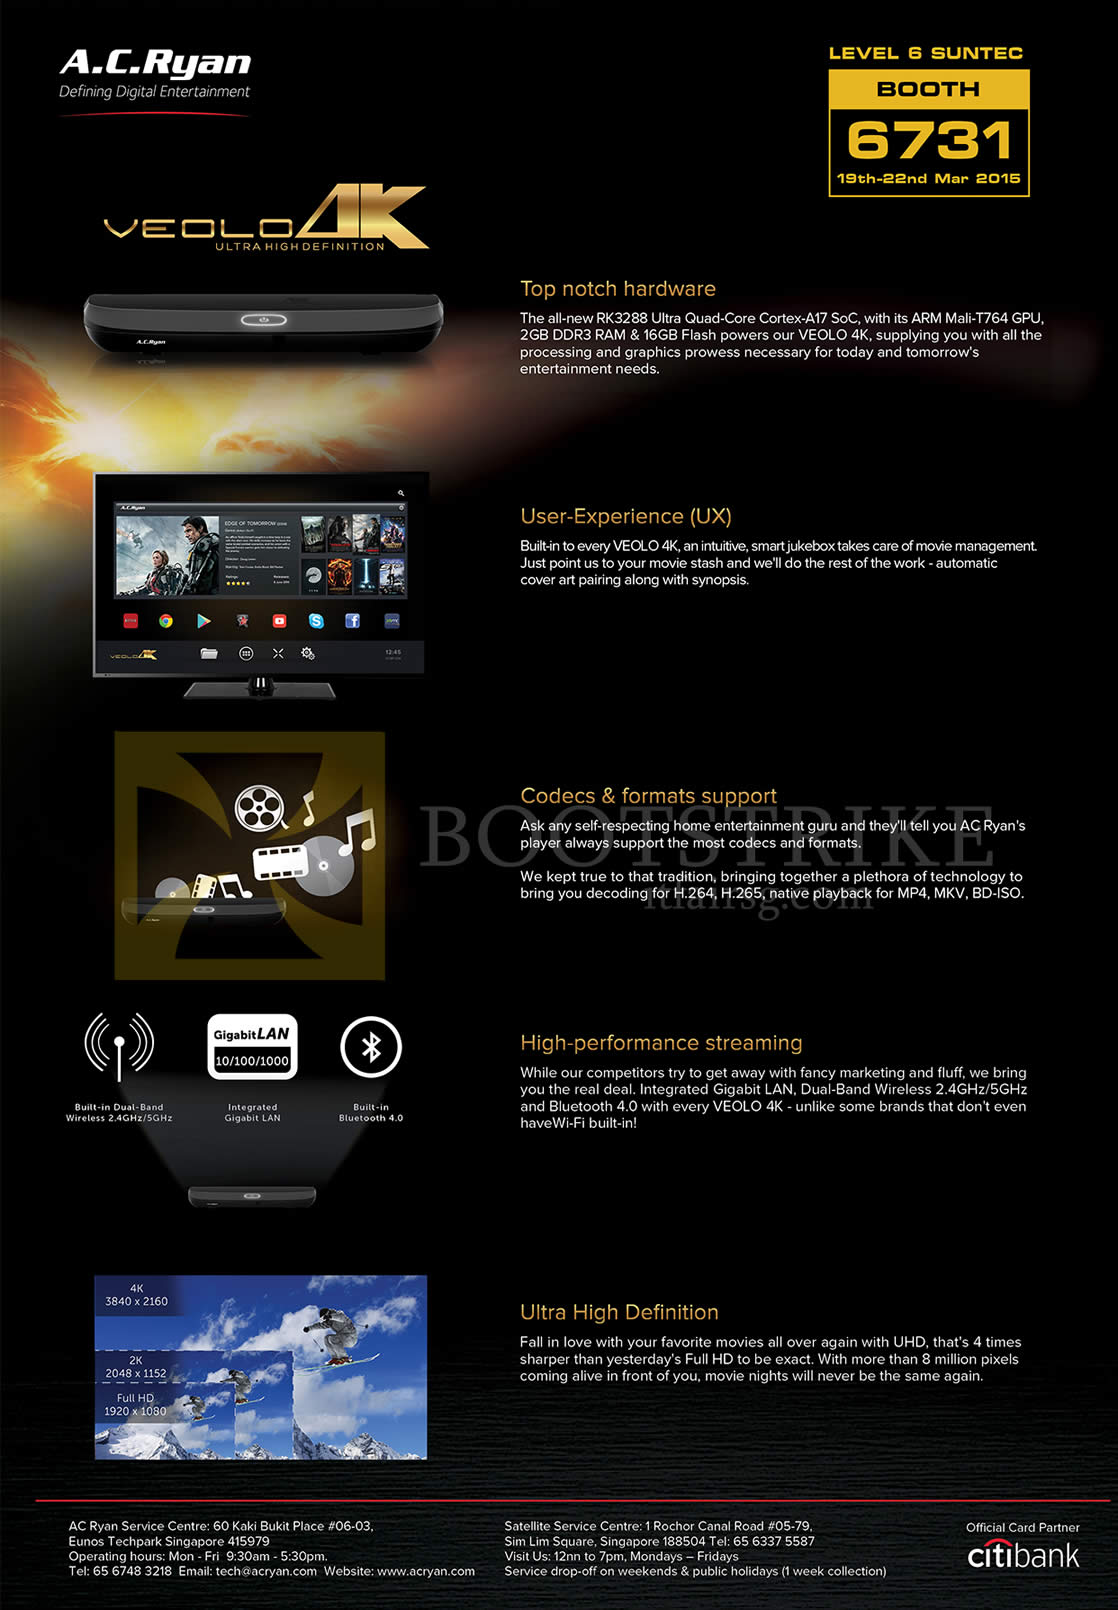 IT SHOW 2015 price list image brochure of AC Ryan Veolo 4K Features